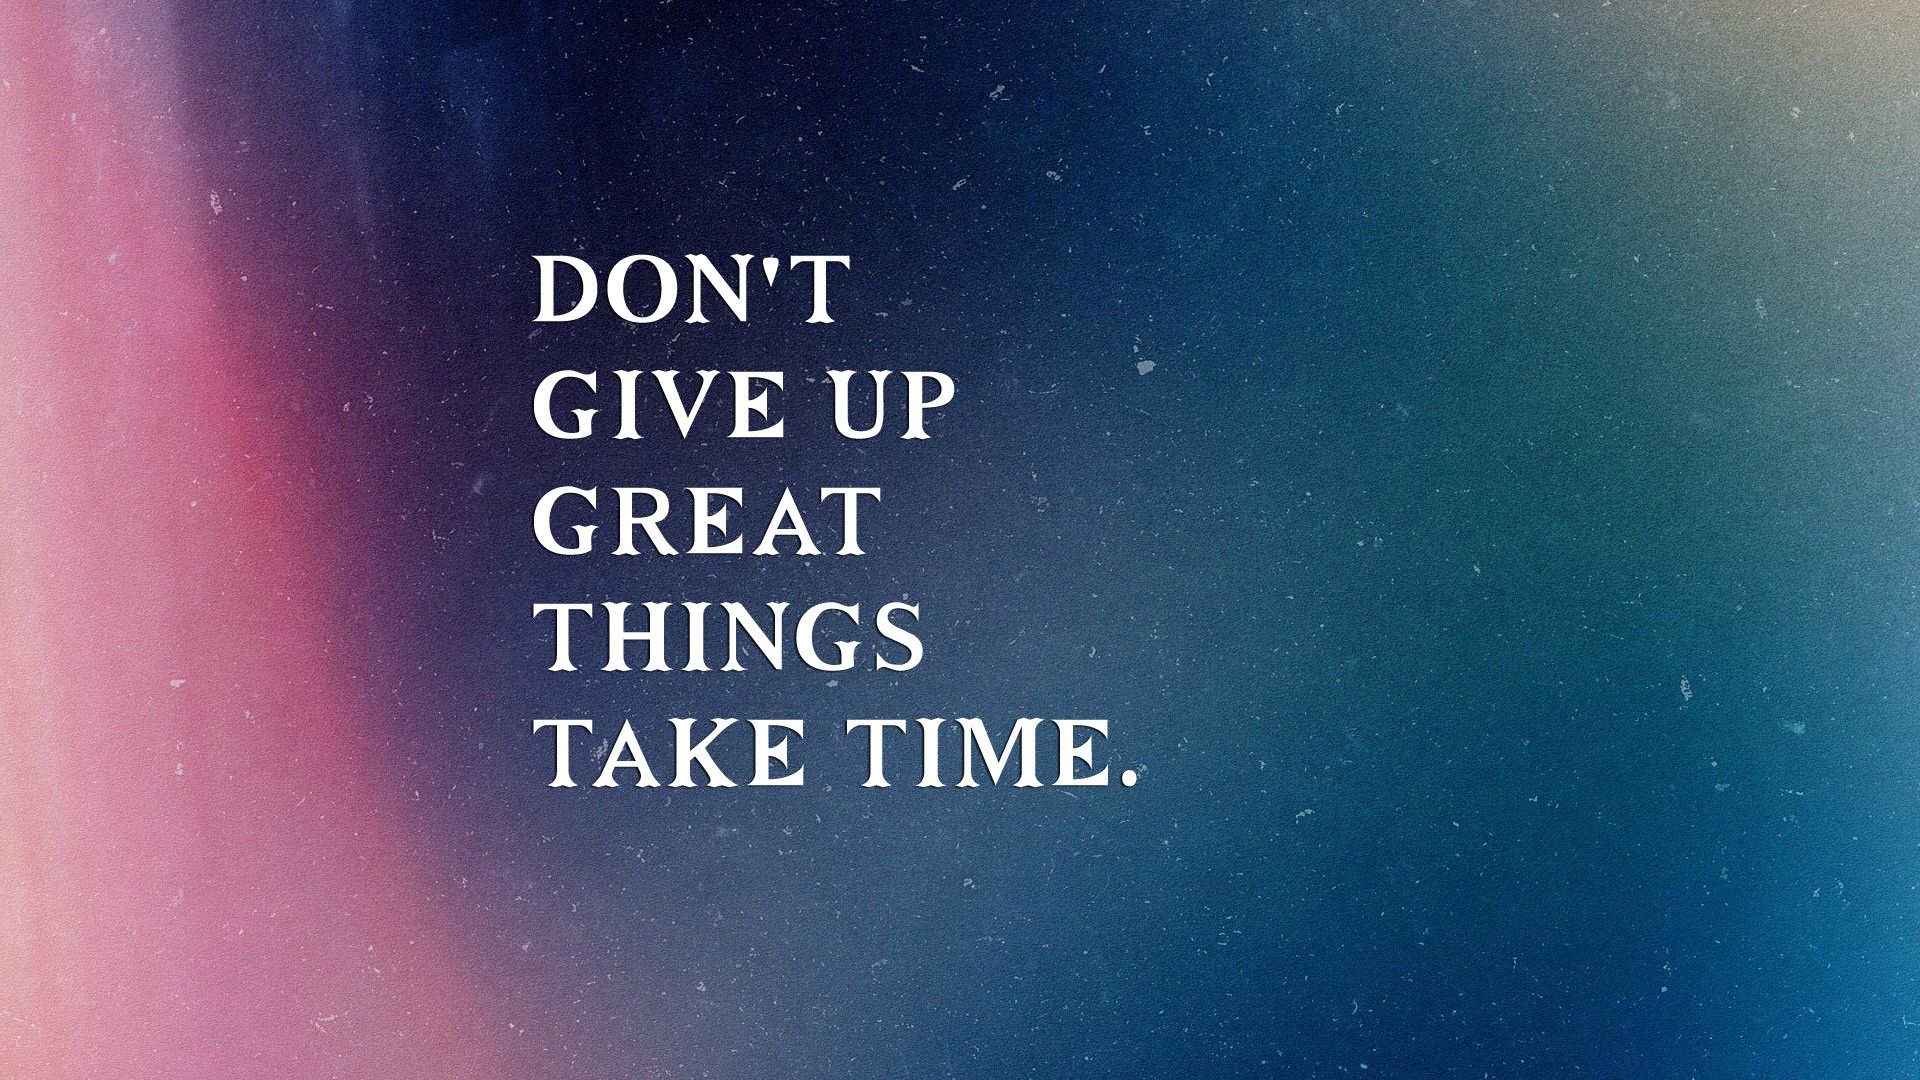 Never Give Up Great Things Take Time Wallpaper for Desktop and Mobiles  iPhone 7 Plus / iPhone 8 Plus - HD Wallpaper 